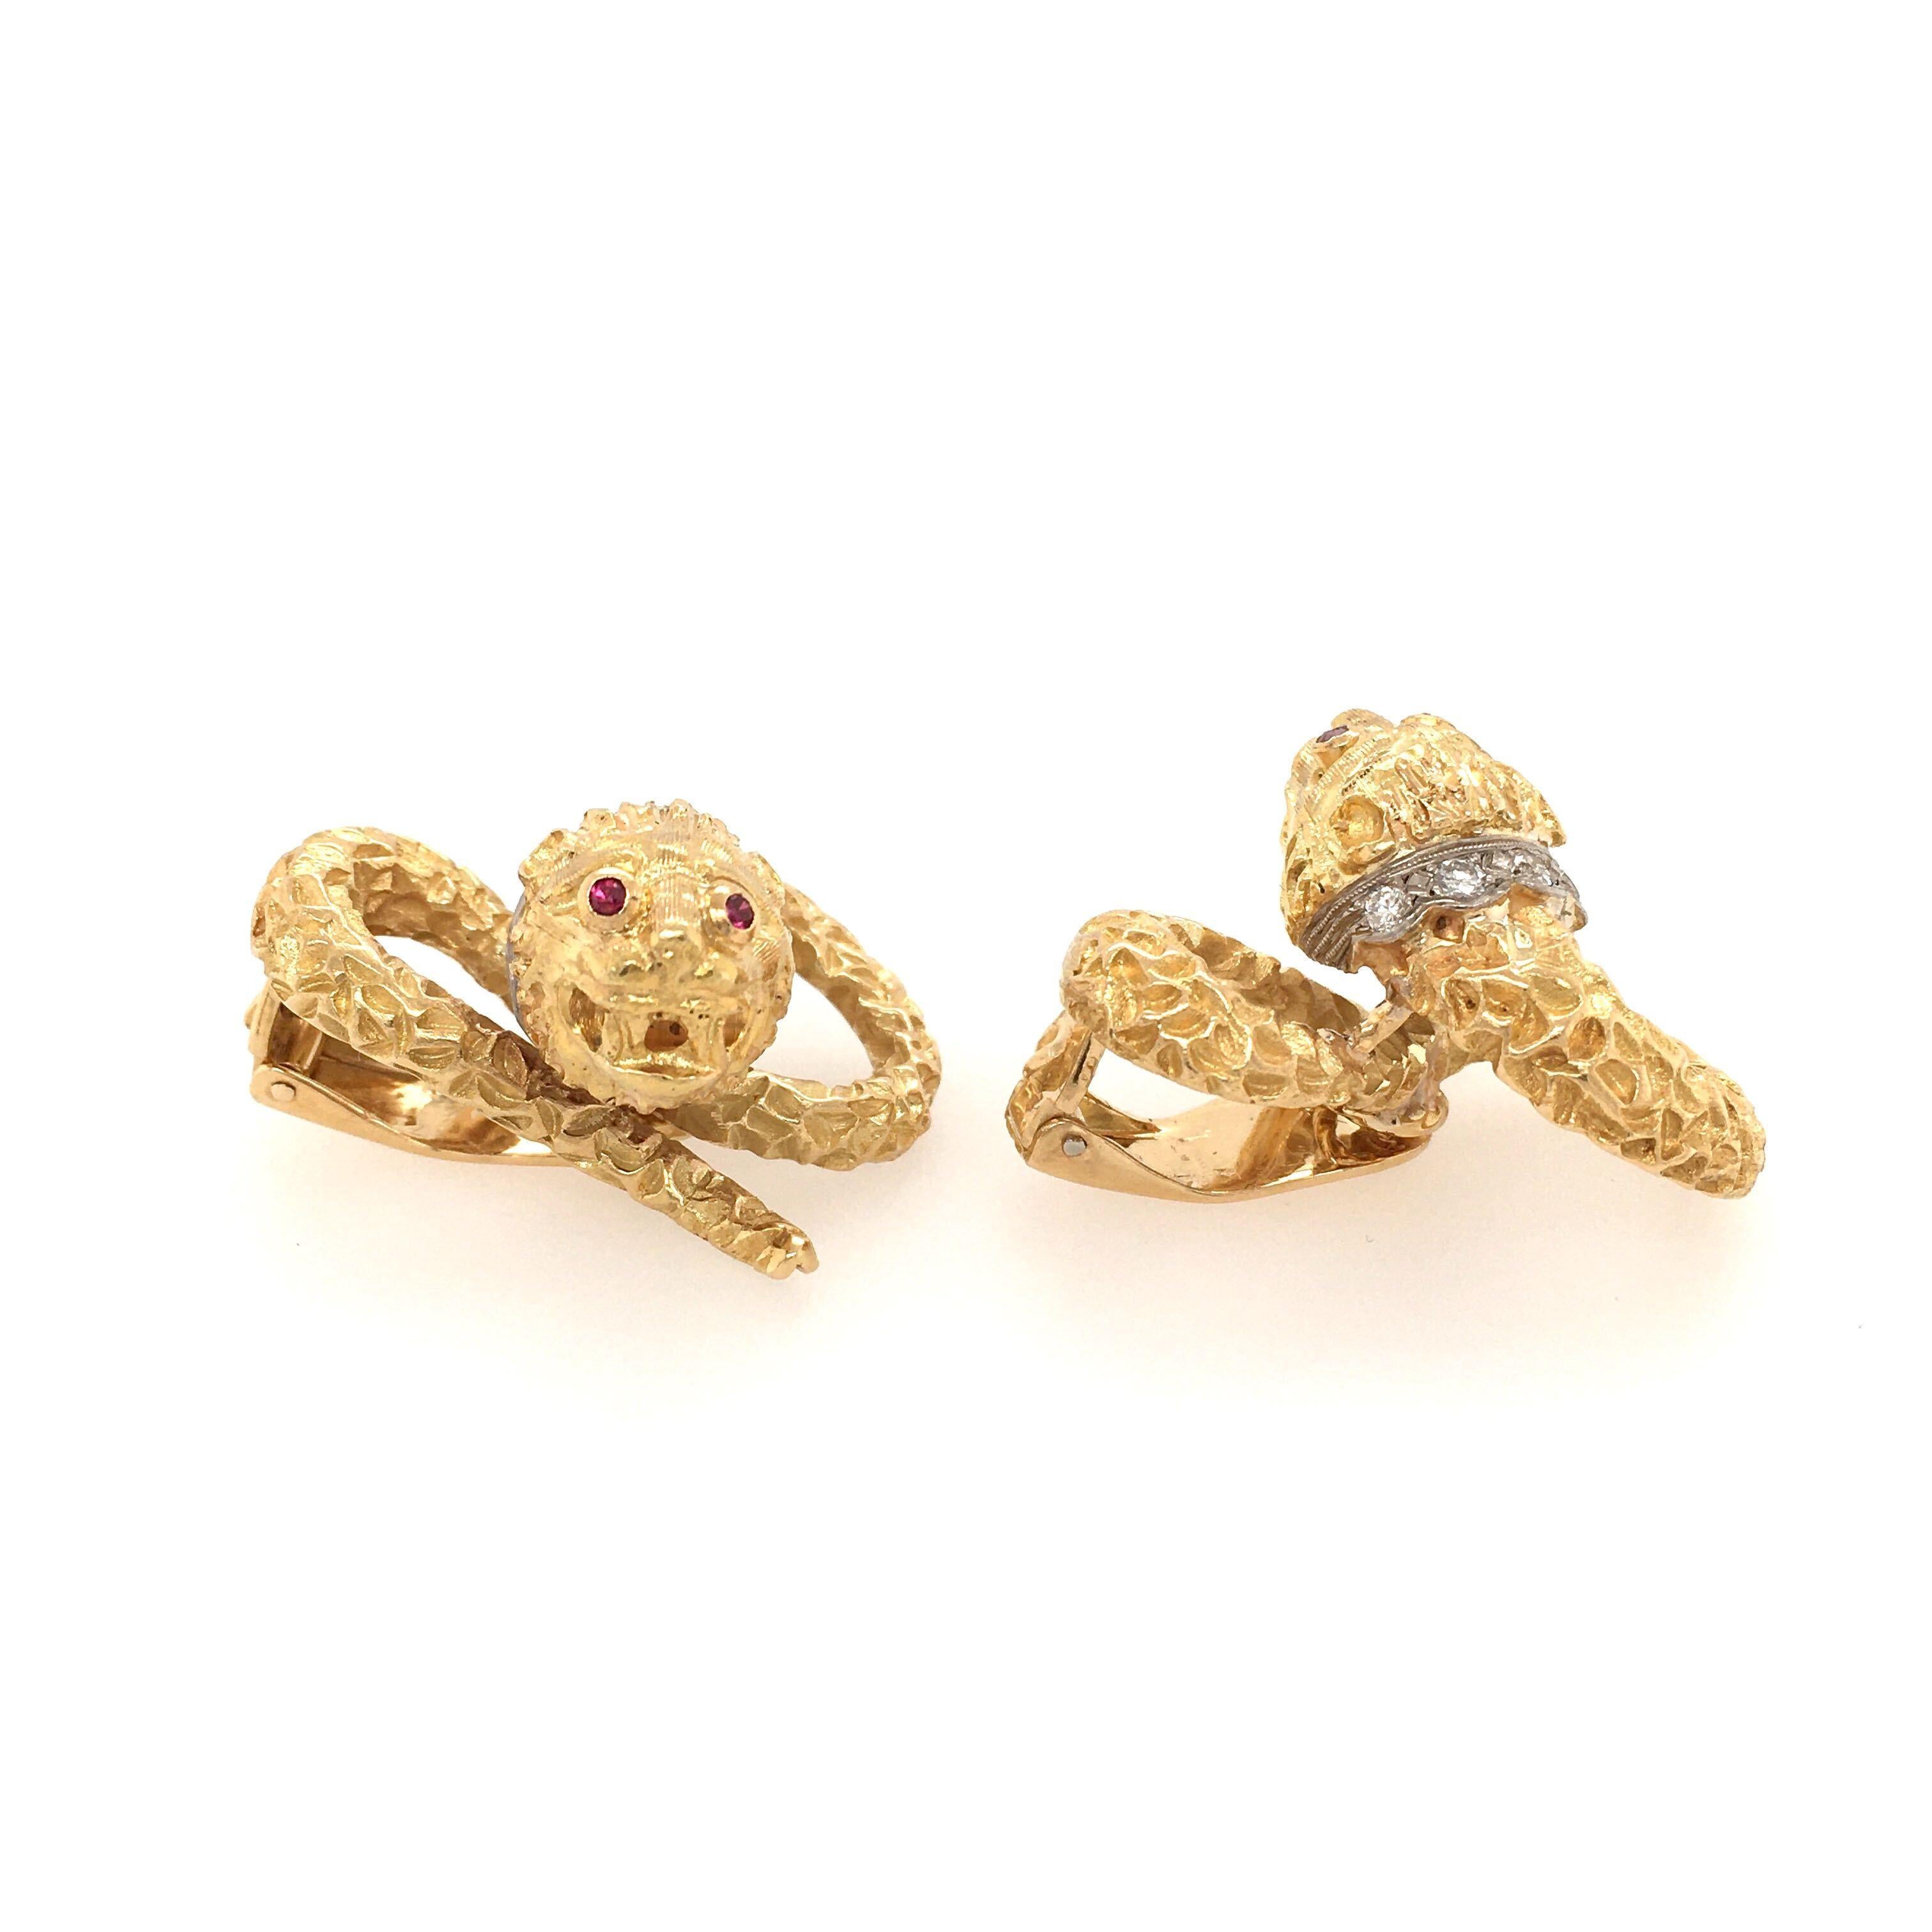 A pair of 18 karat yellow gold, diamond and ruby chimera earrings. Lalaounis. Of textured winding design, enhanced by a pave set diamond collar and circular cut ruby eyes. Length is approximately 1 1/4 inches, gross weight is approximately 29.2